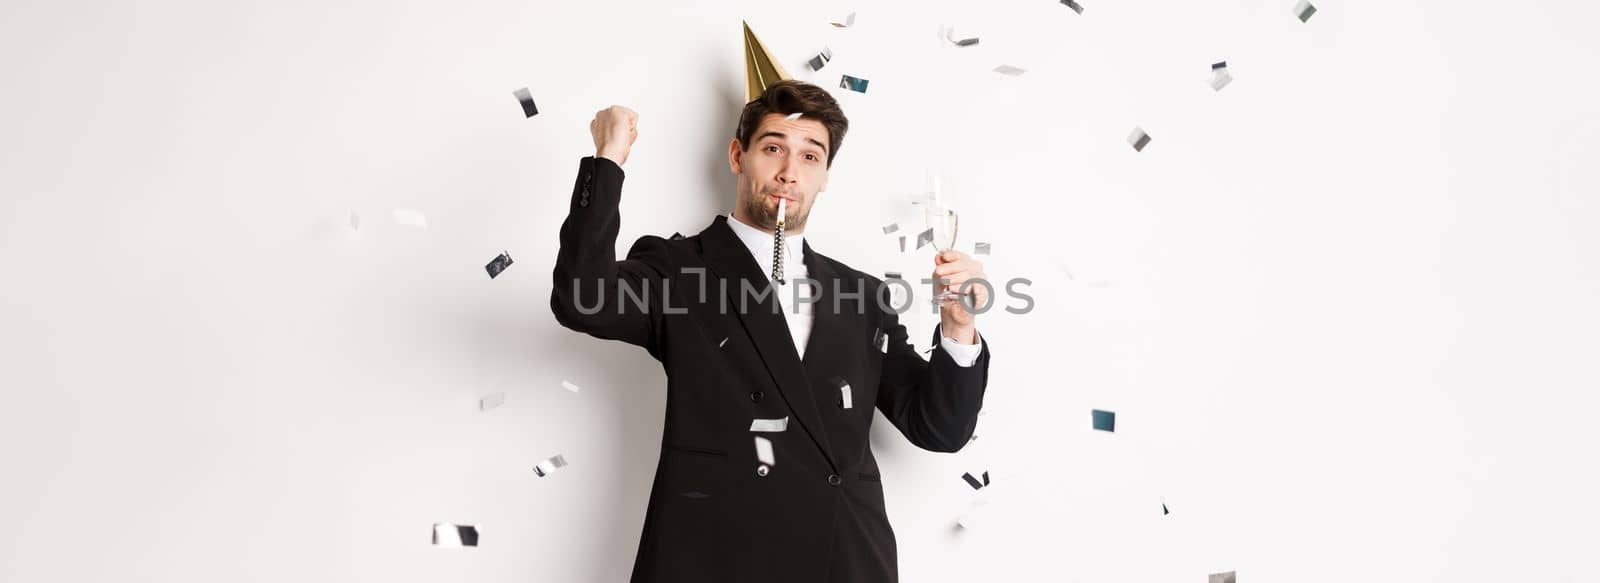 Handsome party guy in black suit having fun, celebrating new year, blowing whistle and drinking champagne while confetti falling, standing happy against white background.